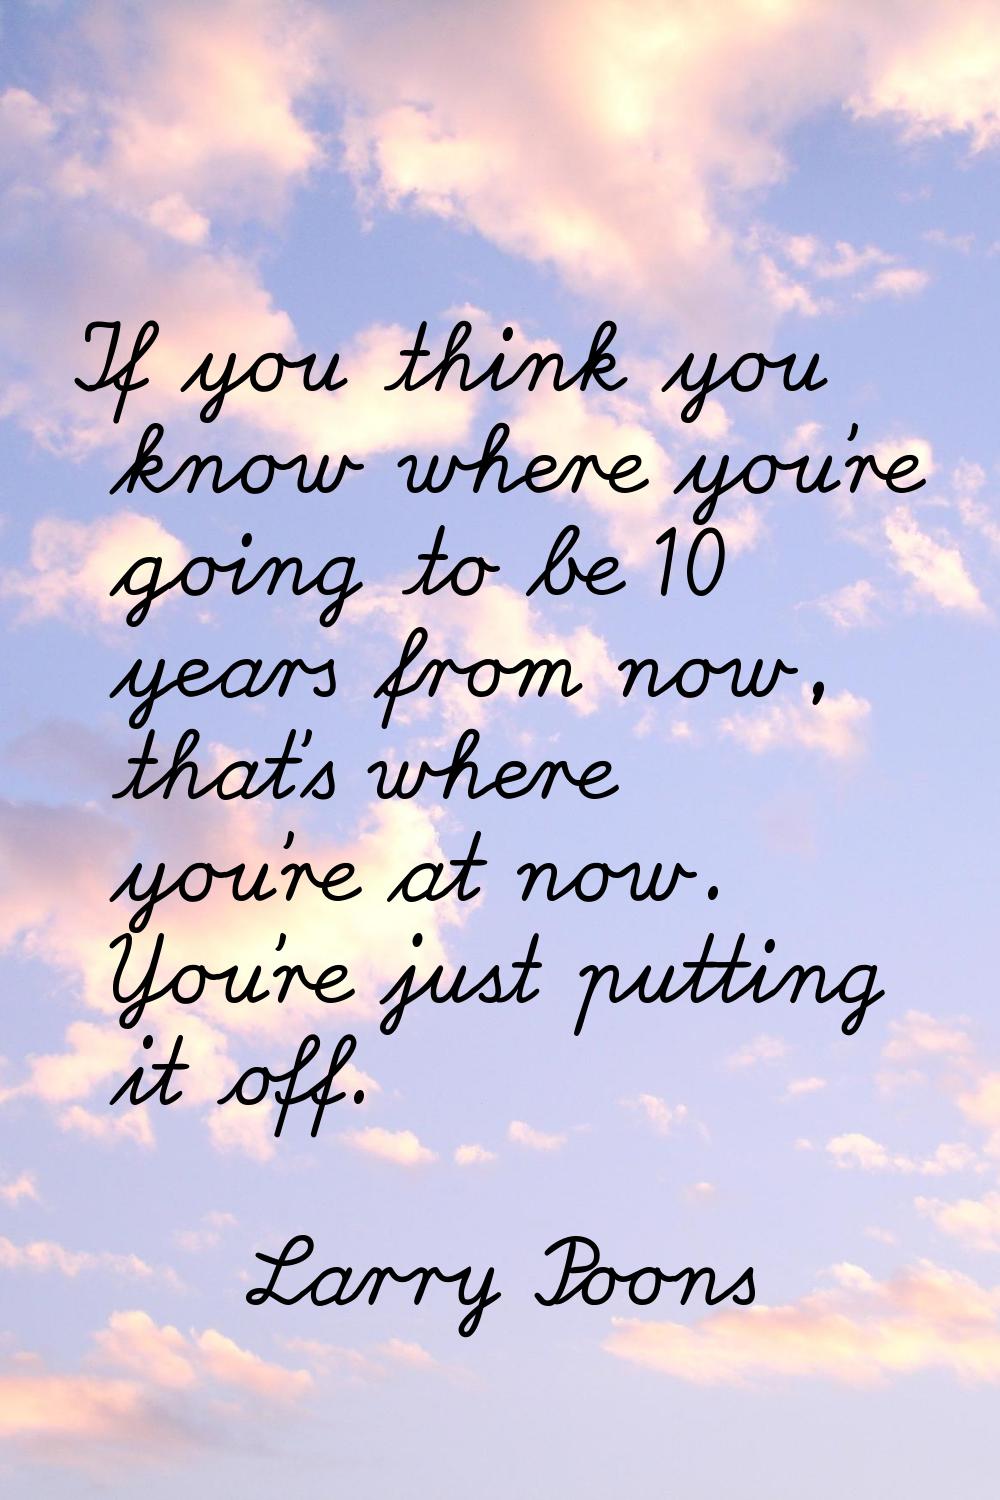 If you think you know where you're going to be 10 years from now, that's where you're at now. You'r